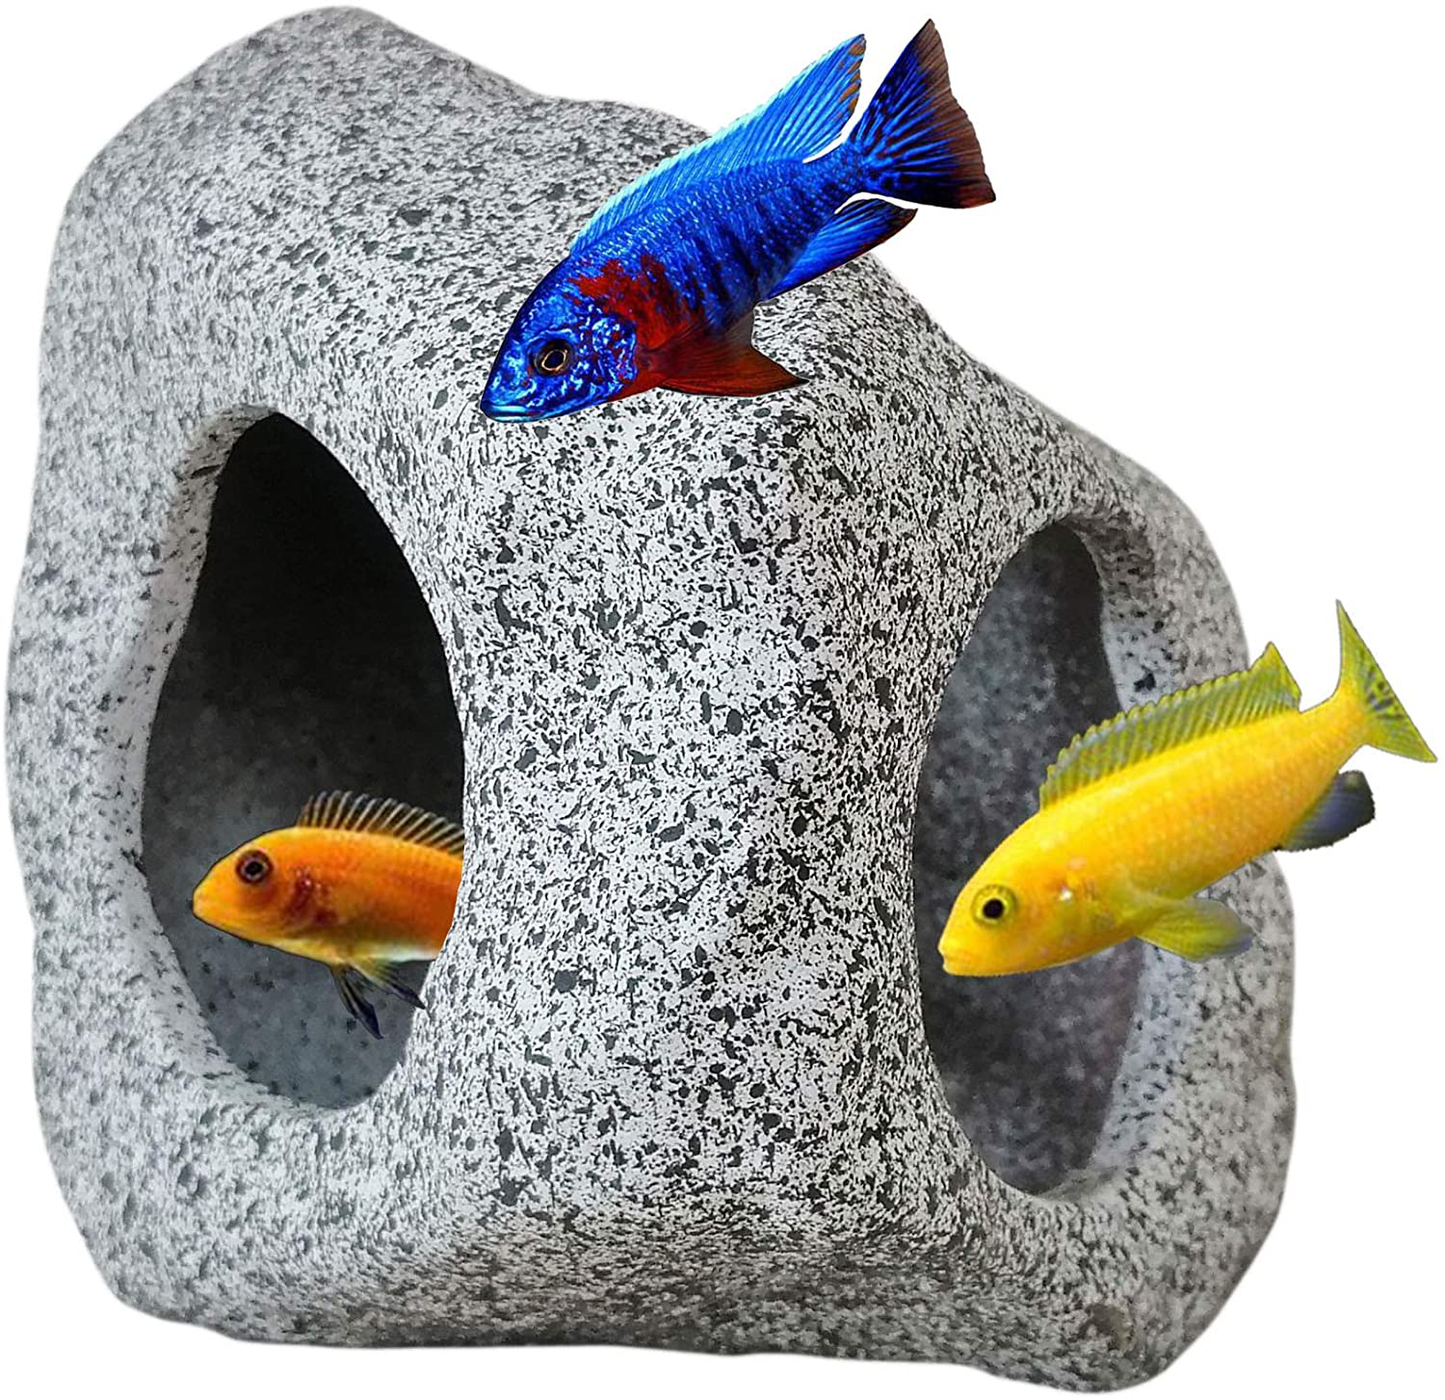 Springsmart Aquarium Hideaway Rock Cave for Aquatic Pets to Breed, Play and Rest, Safe and Non-Toxic Ceramic Fish Tank Ornaments, Decor Stone for Betta Animals & Pet Supplies > Pet Supplies > Fish Supplies > Aquarium Decor SpringSmart   